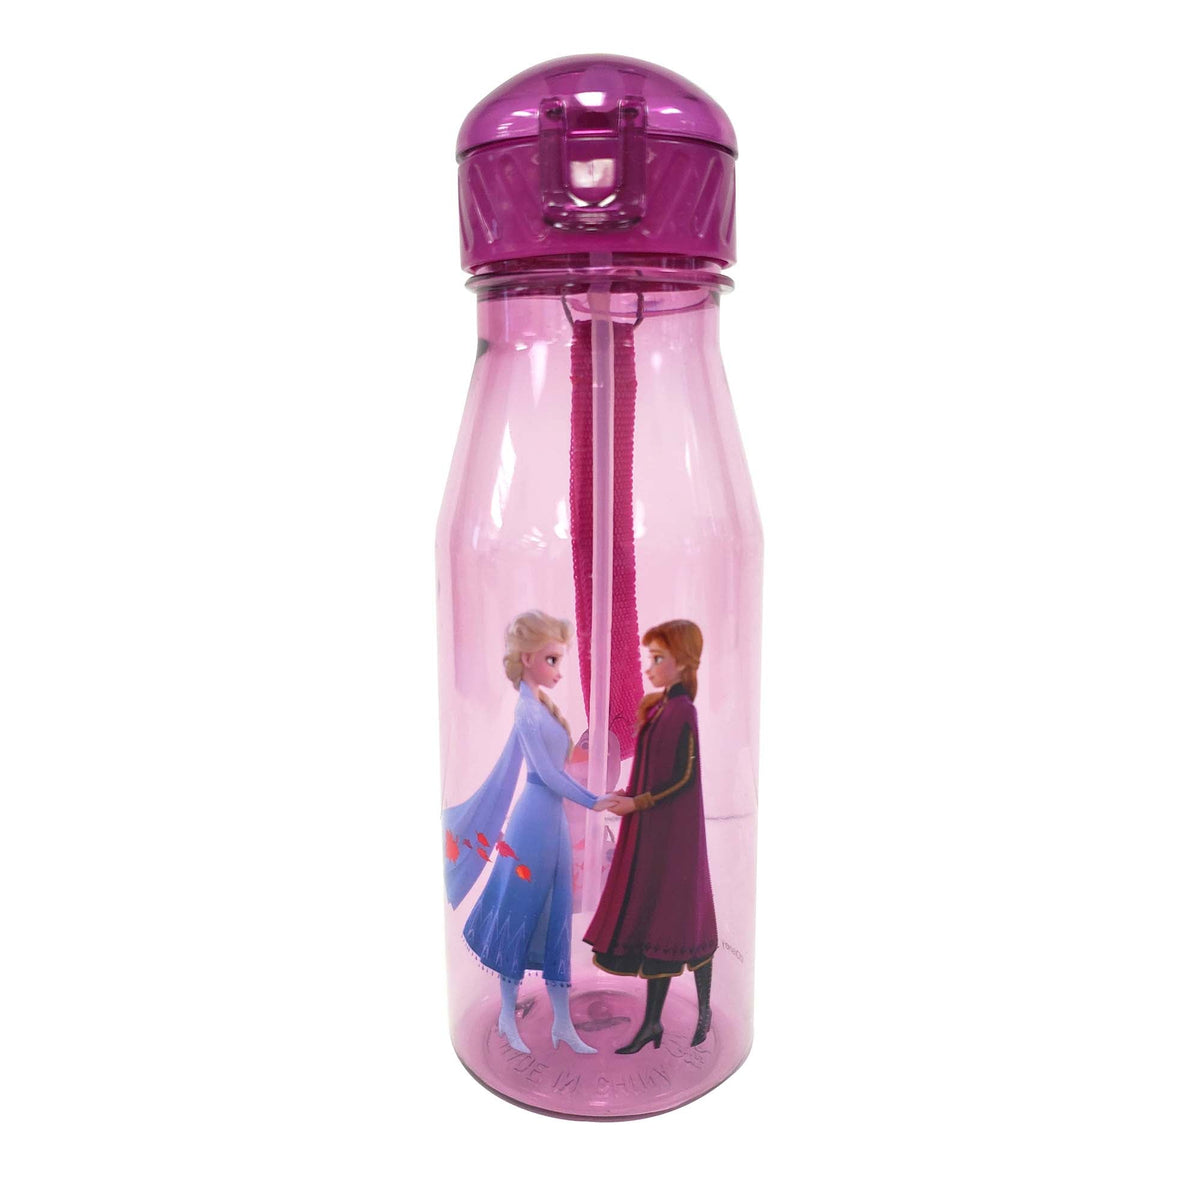 DANAWARES Kids Birthday Disney Frozen 2 Purple Dome Cap Bottle with Straw and Carrying Strap, 1 Count 059562401565